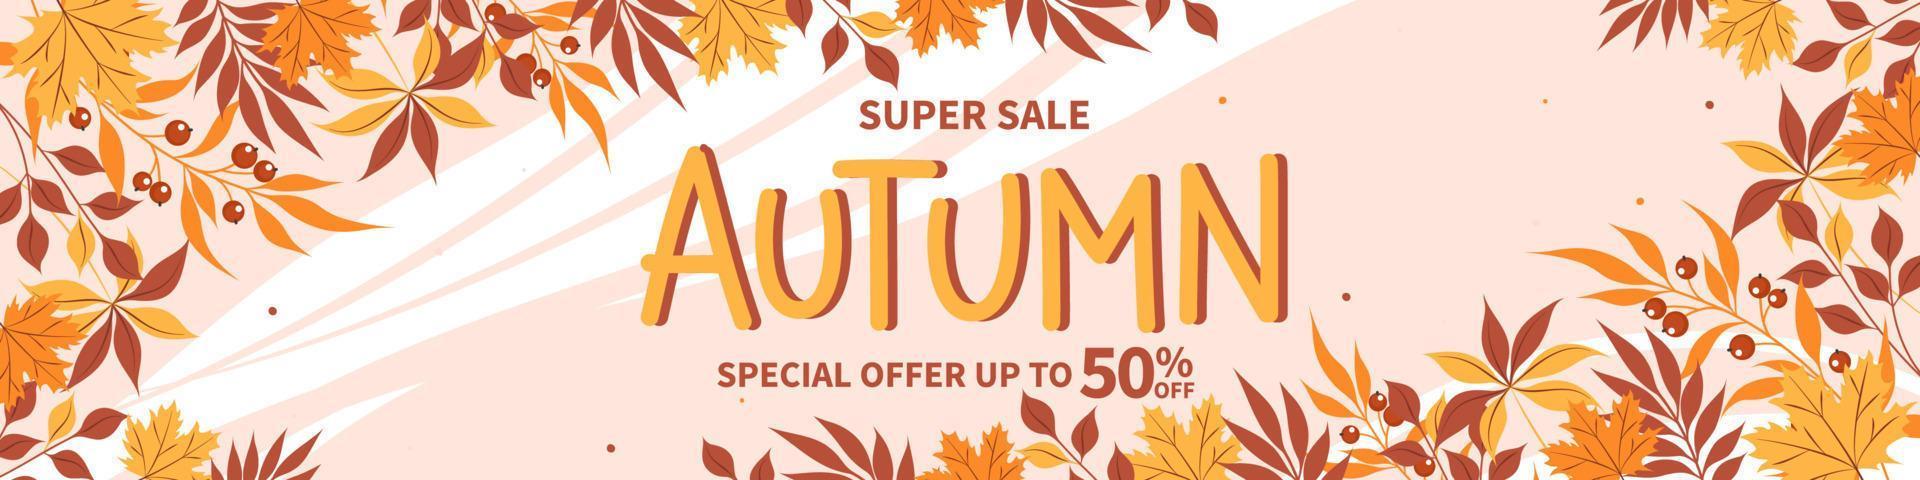 Autumn sale horizontal banner with leaves. Bright poster, flyer with invitation for shopping, template offer of discounts deals. Vector Illustration